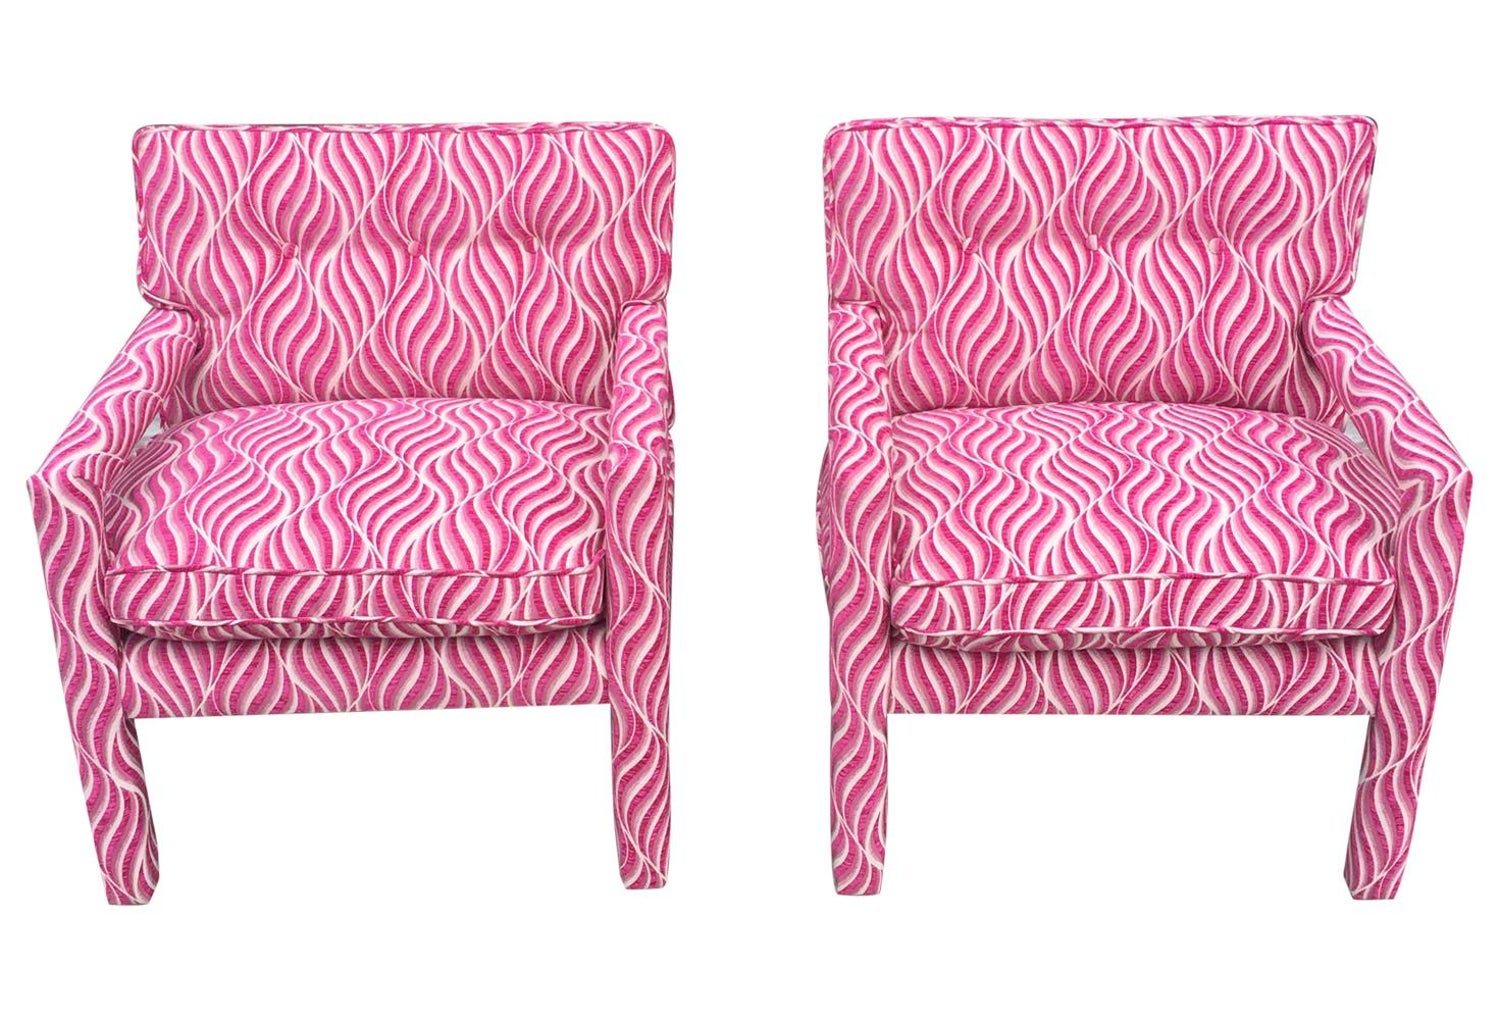 Fuschia Pink And White Animal Print Parsons Chairs At 1stdibs